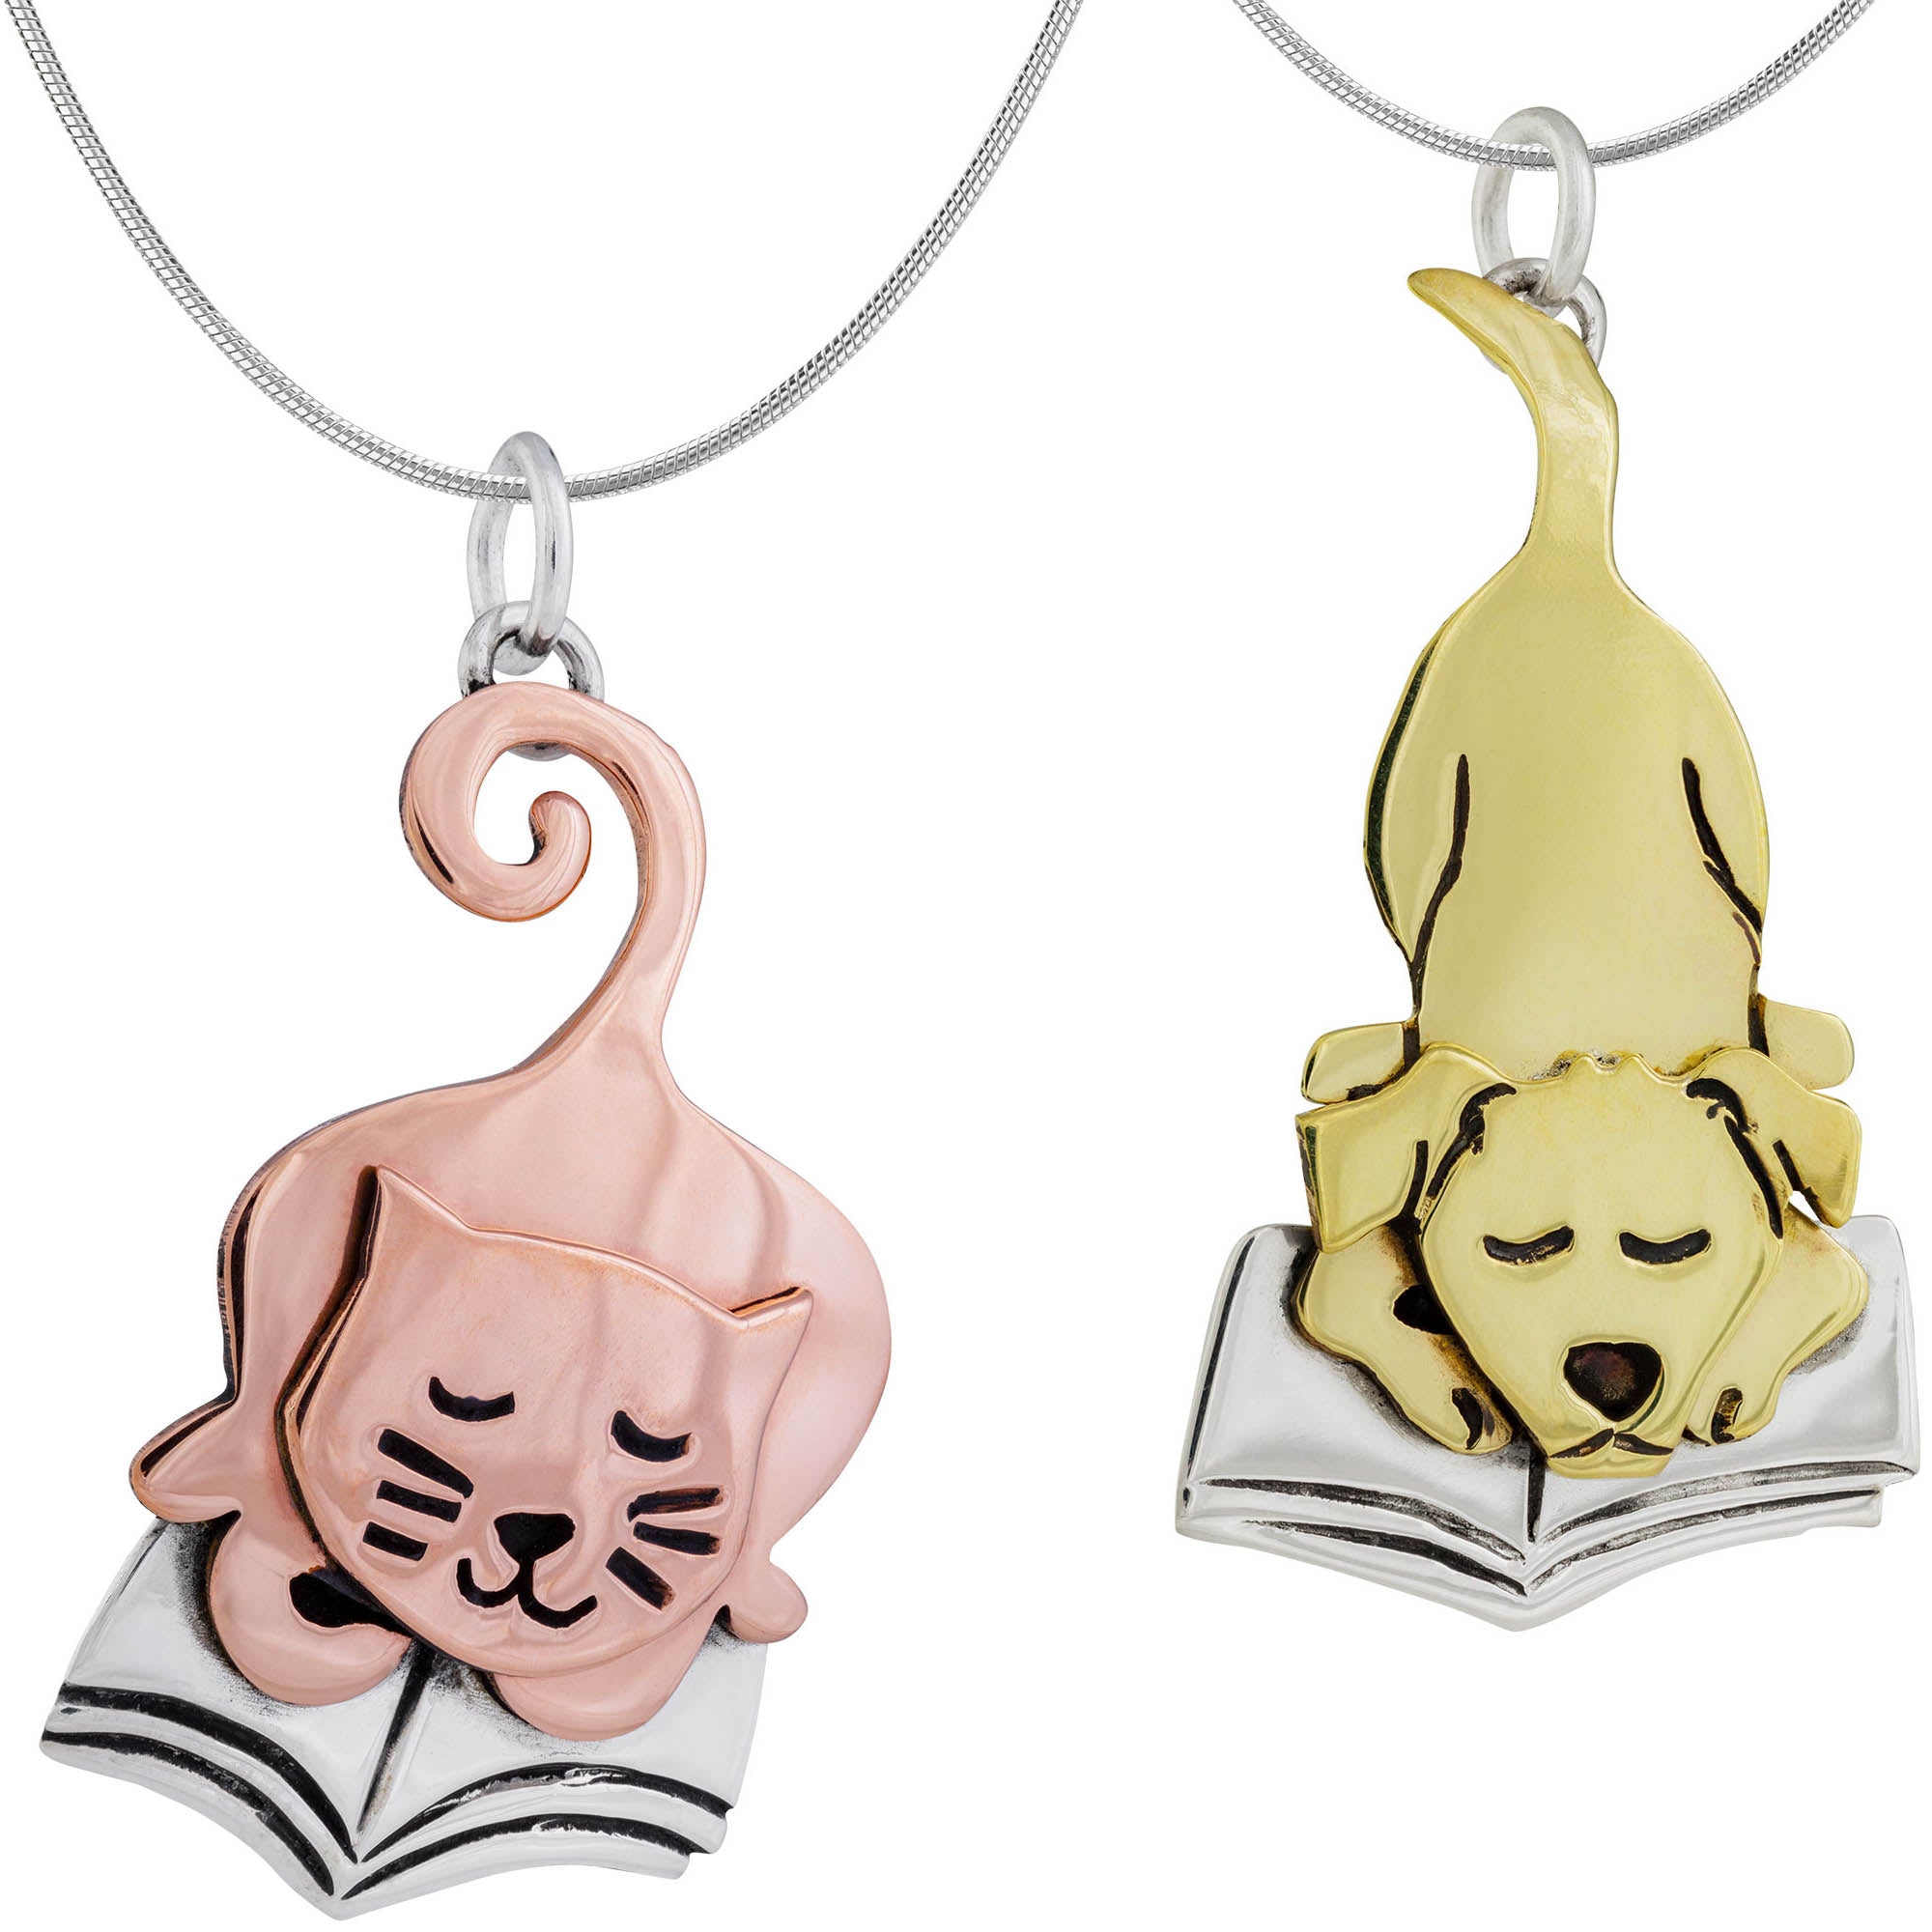 Pet Lover Book Club Sterling Necklace - Dog - With Snake Chain